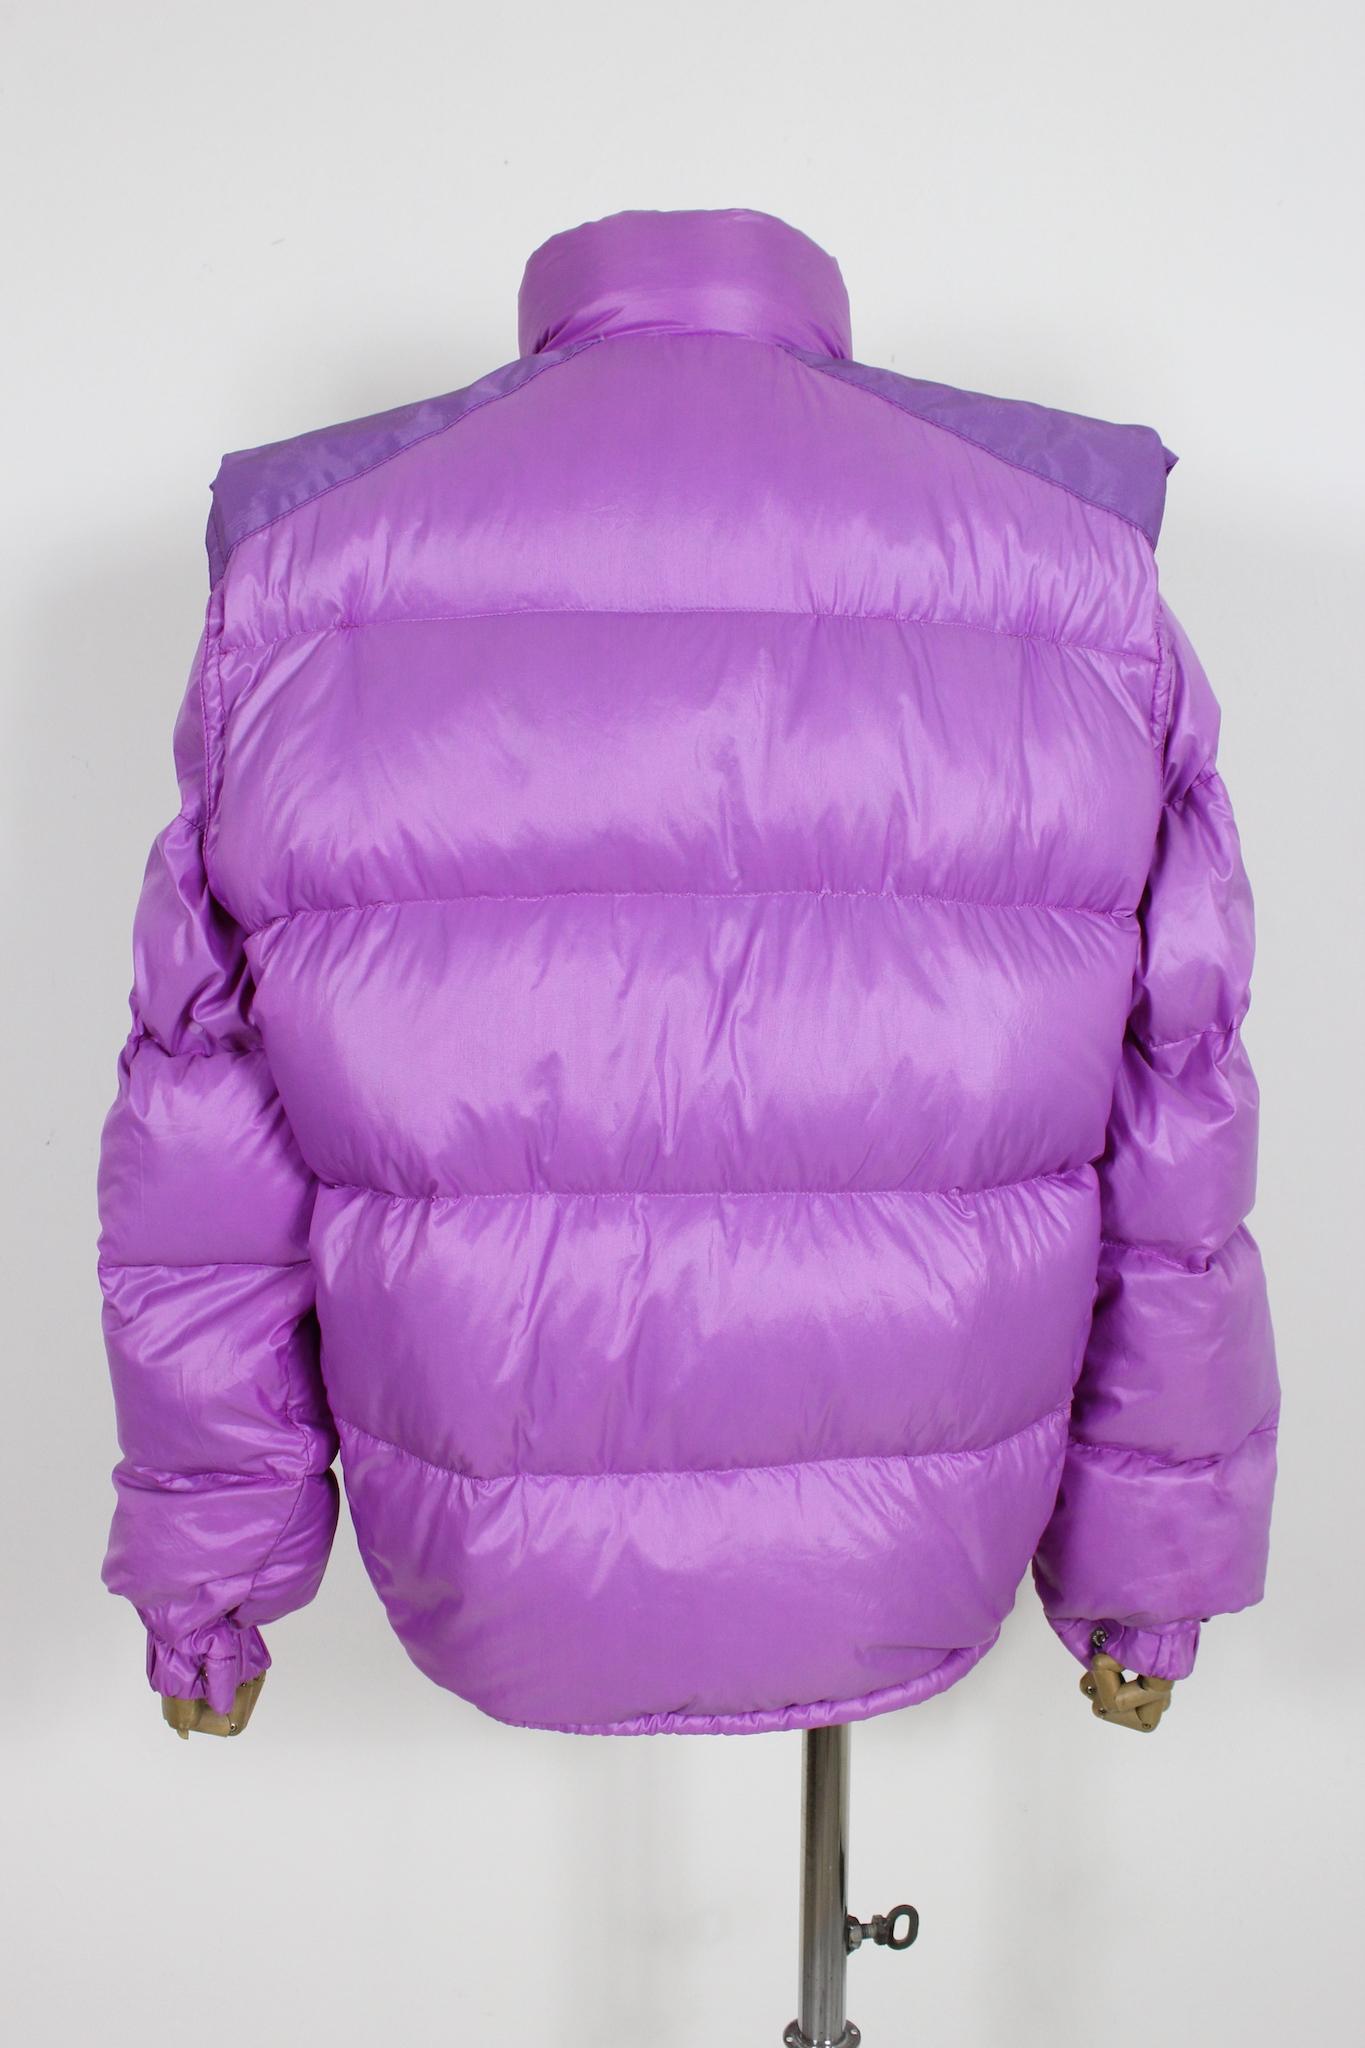 Moncler grenoble vintage 80s padded jacket. The jacket has a double fit both as a gilet with removable sleeves with a zip. Closure with zip and clip buttons, adjustable waist laces. Monogram pattern on the shoulders with tone-on-tone Moncler logo.